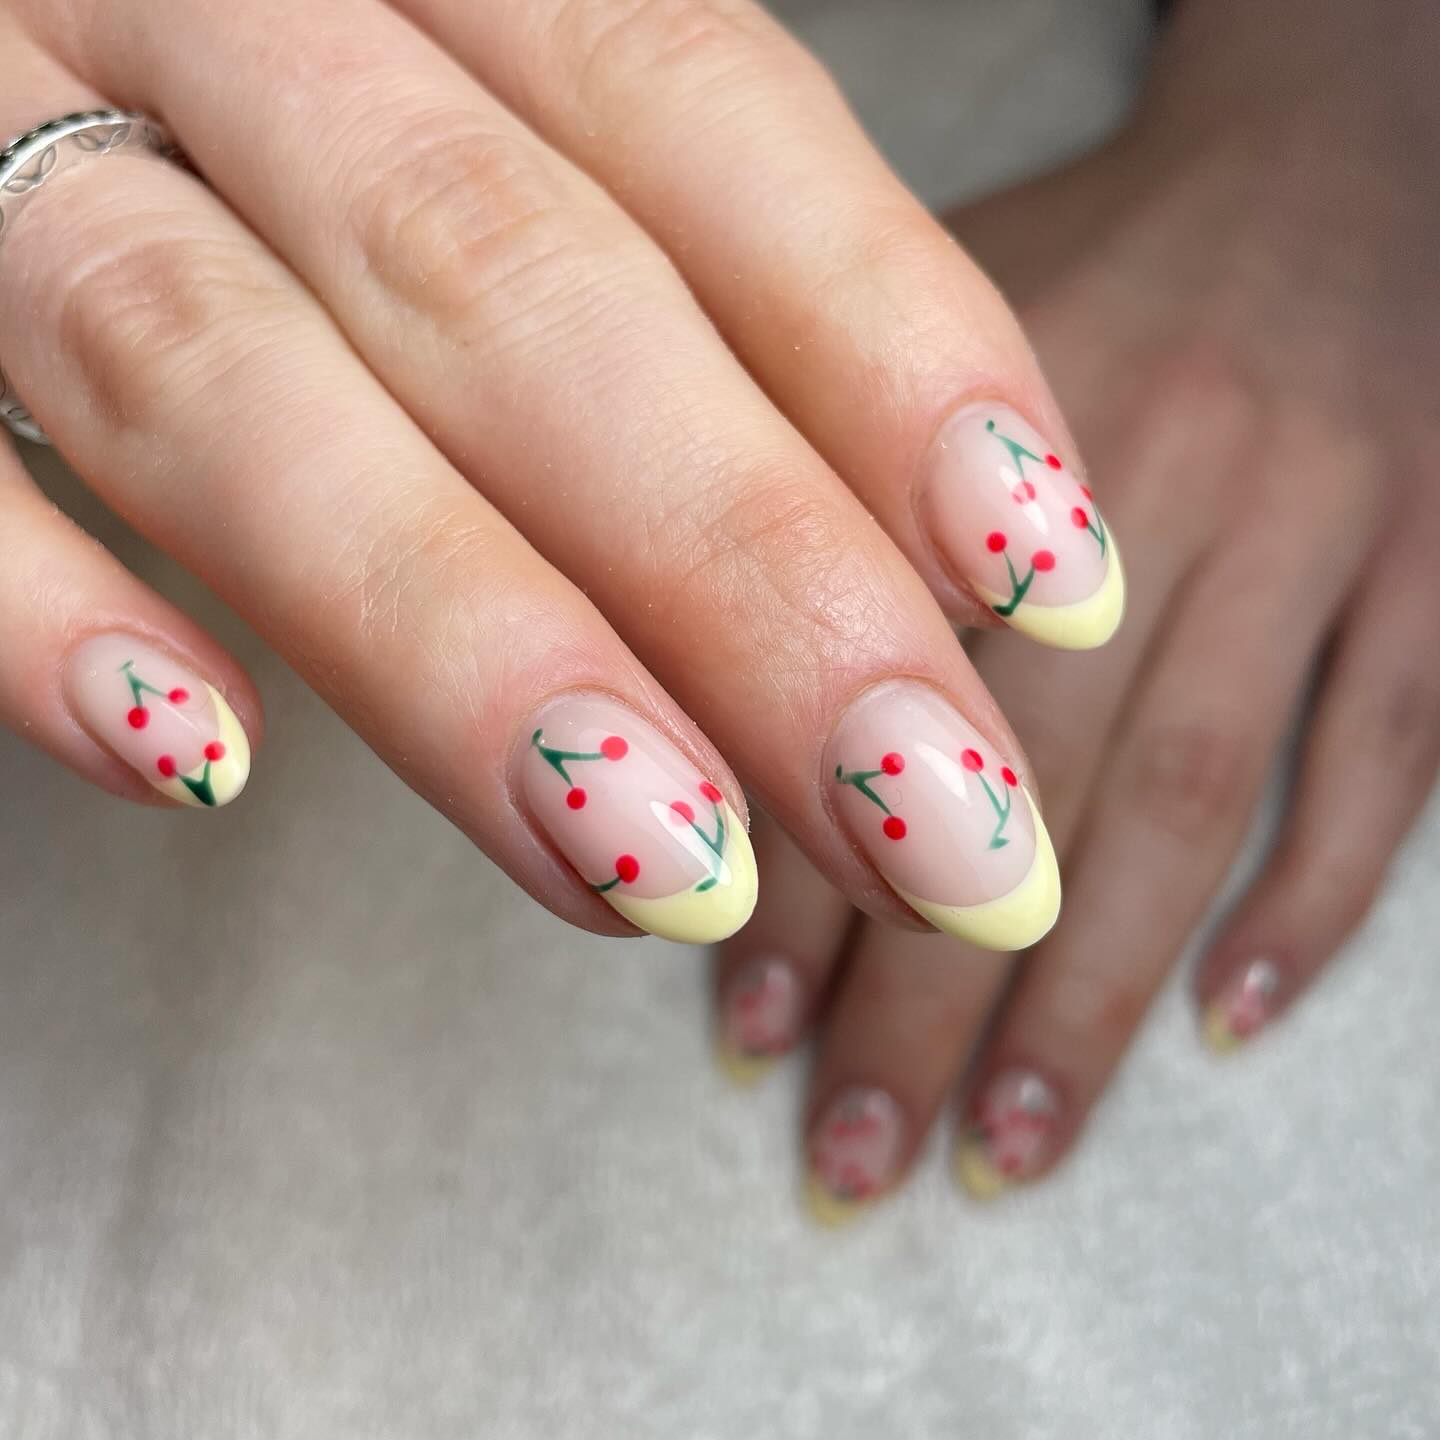 100 Pretty Spring Nail Designs To Try This Year images 63